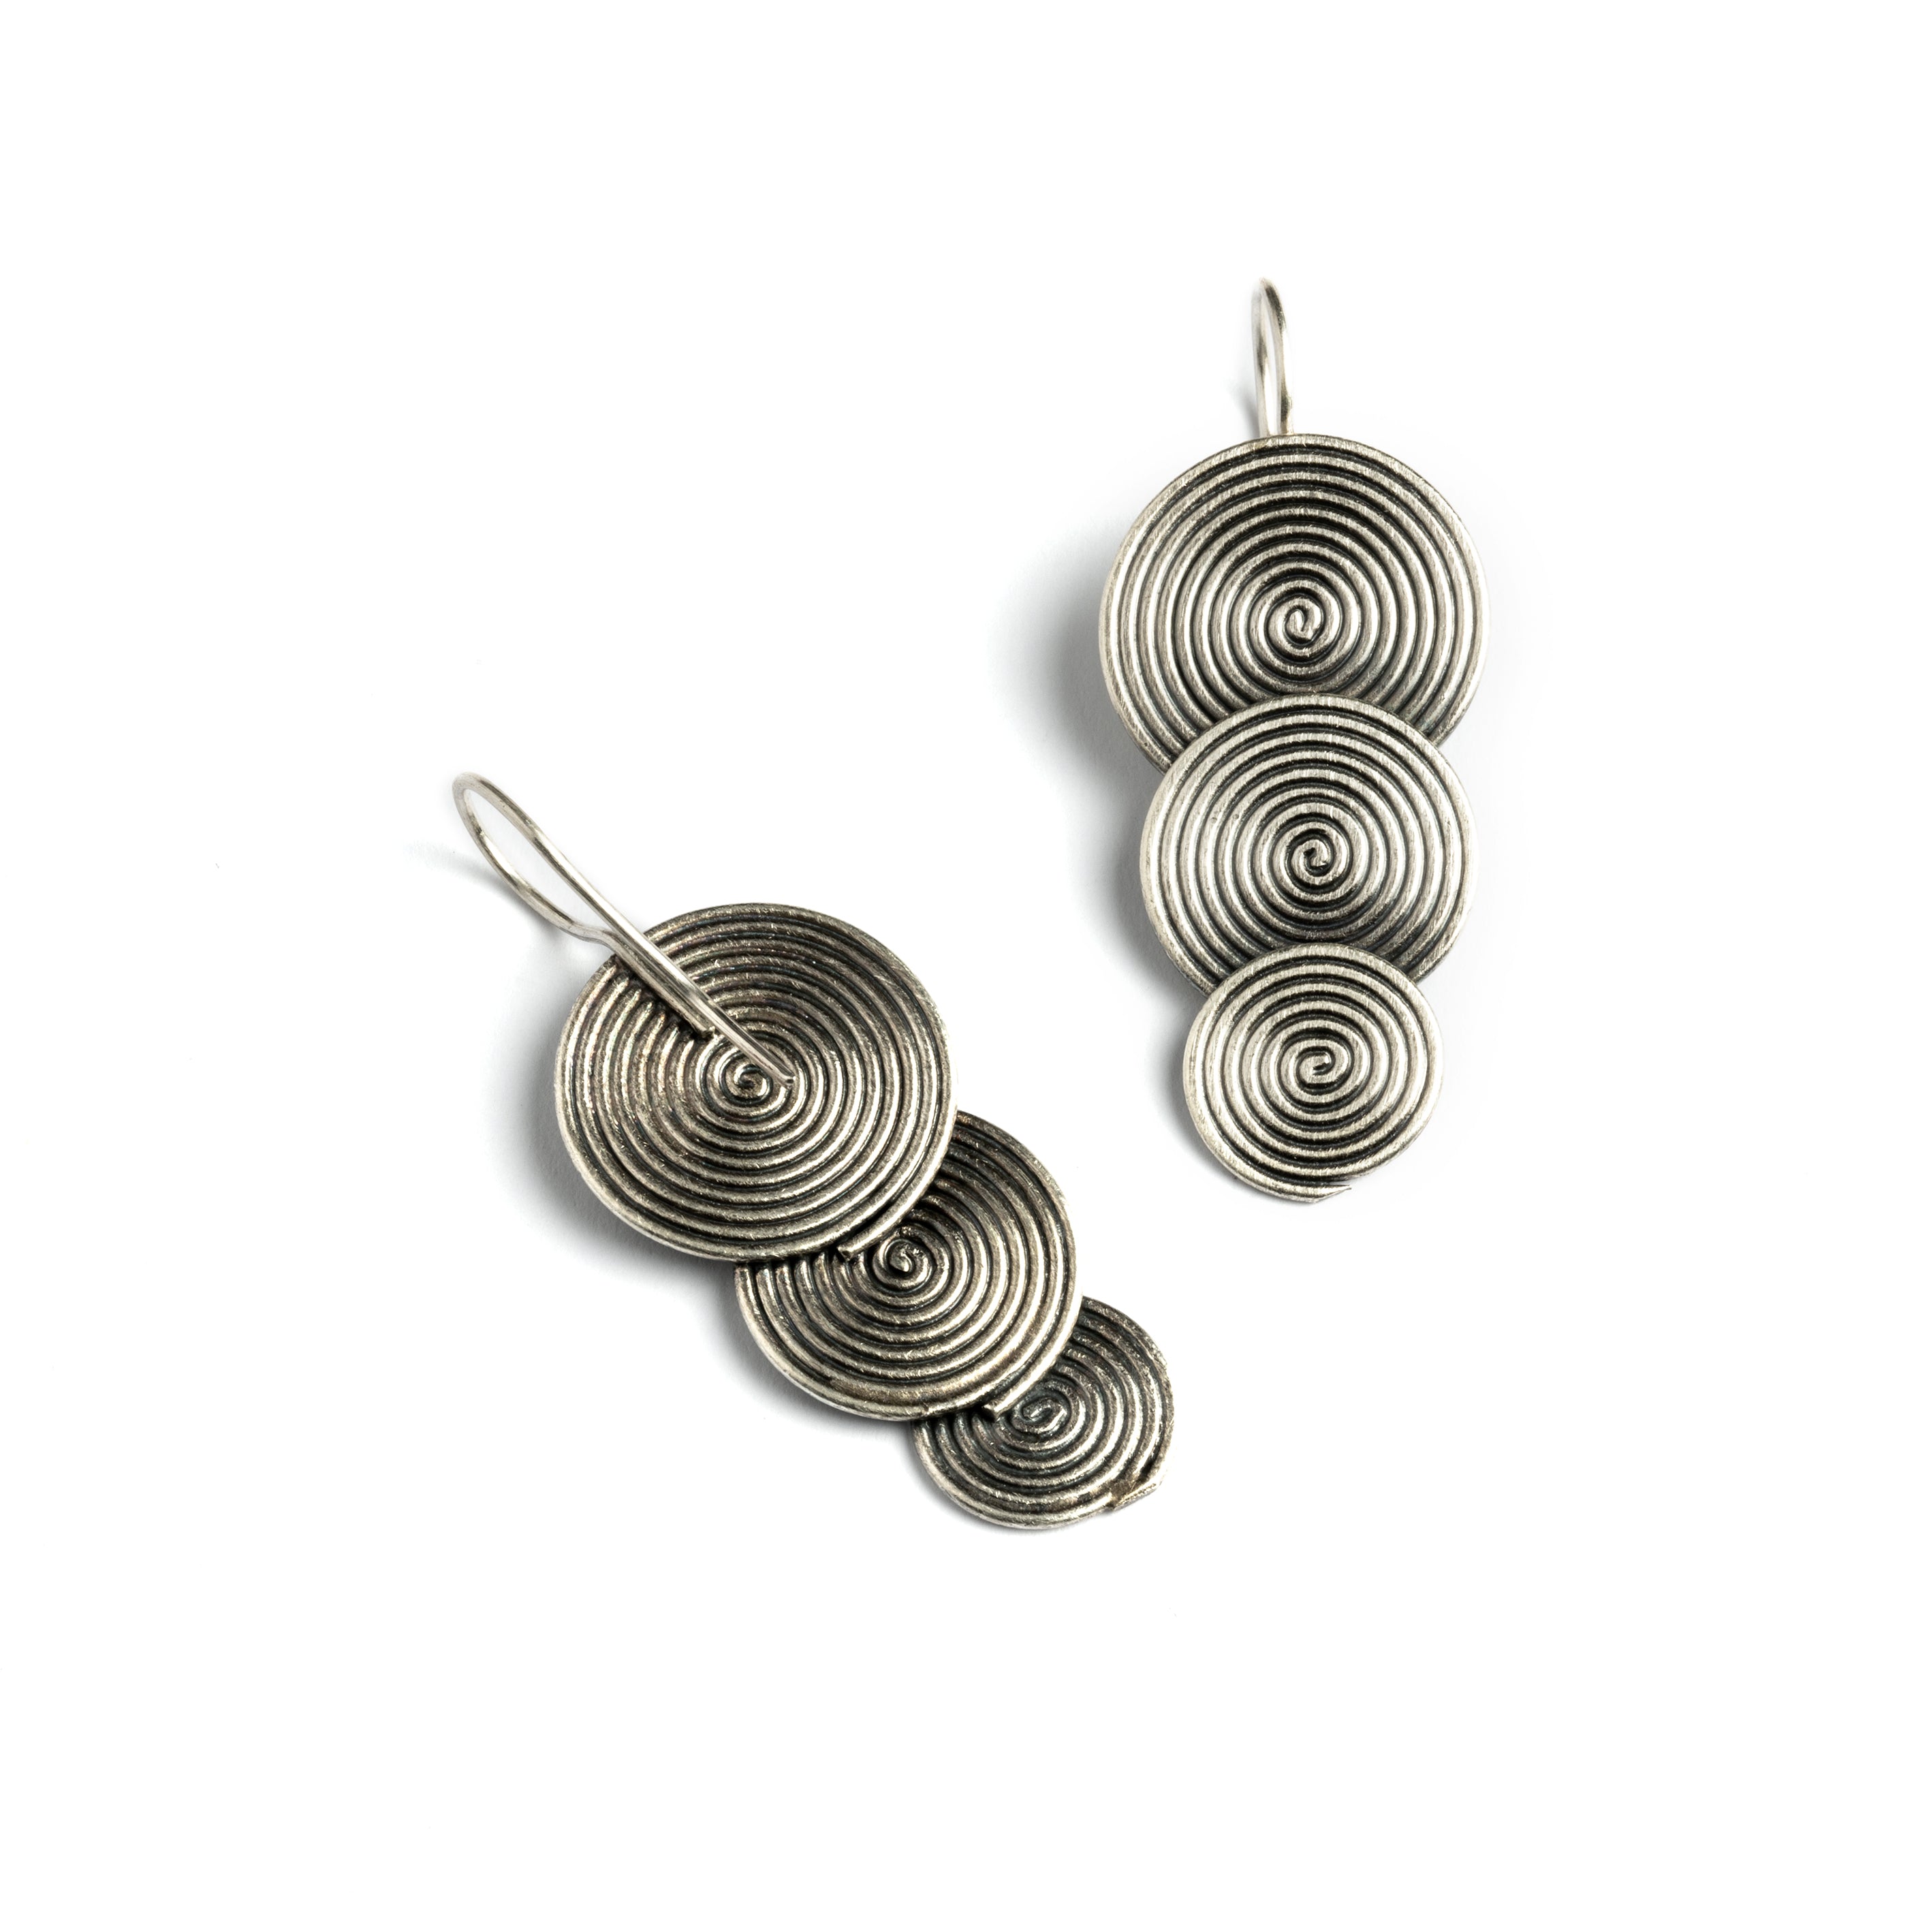 Tribal Silver Earrings With Three Engraved Silver Medalions